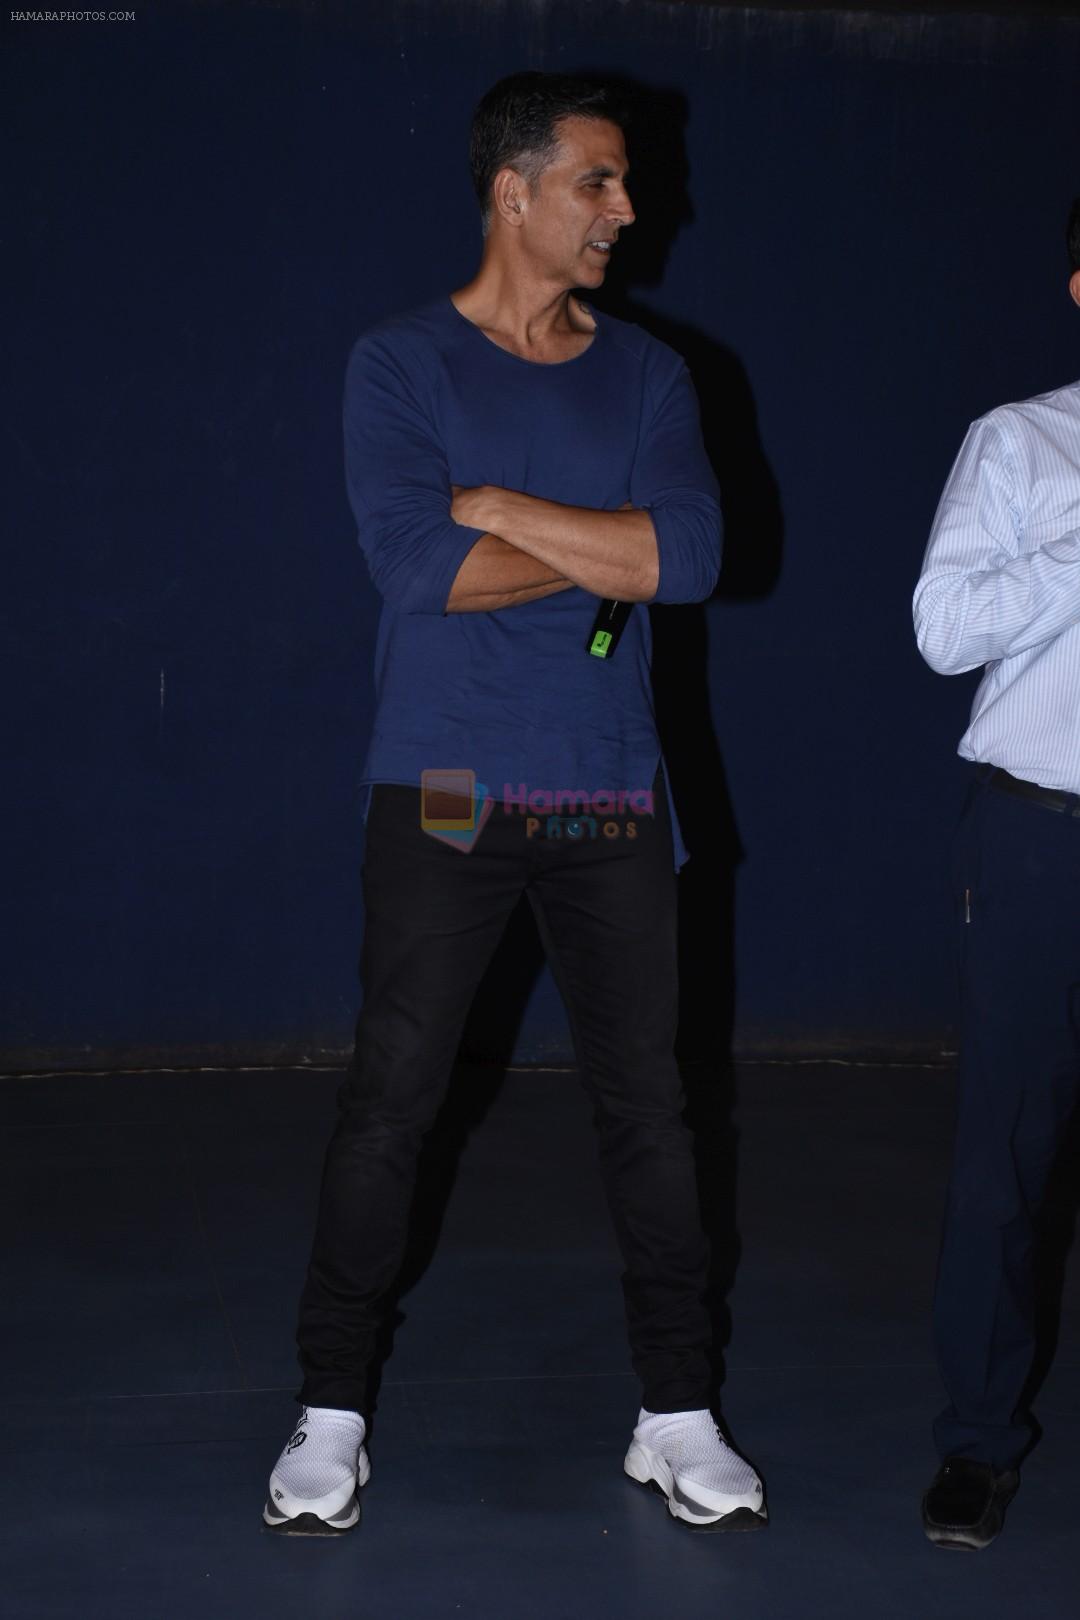 Akshay Kumar attends the special screening of film Mission Mangal hosted for BMC workers at plaza cinema in Dadar on 20th Aug 2019